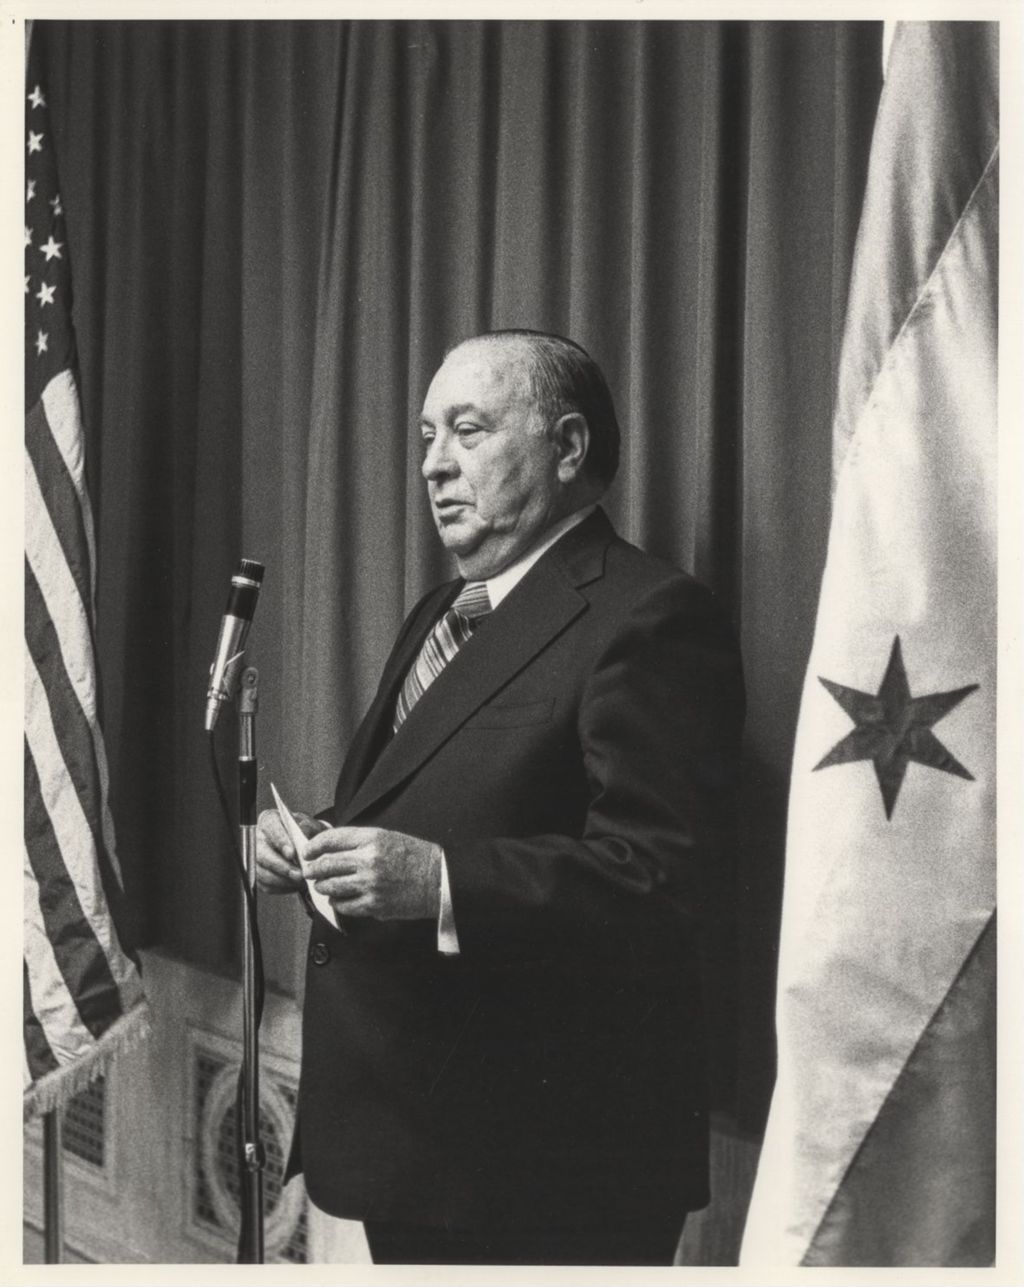 Miniature of Richard J. Daley speaking at a microphone